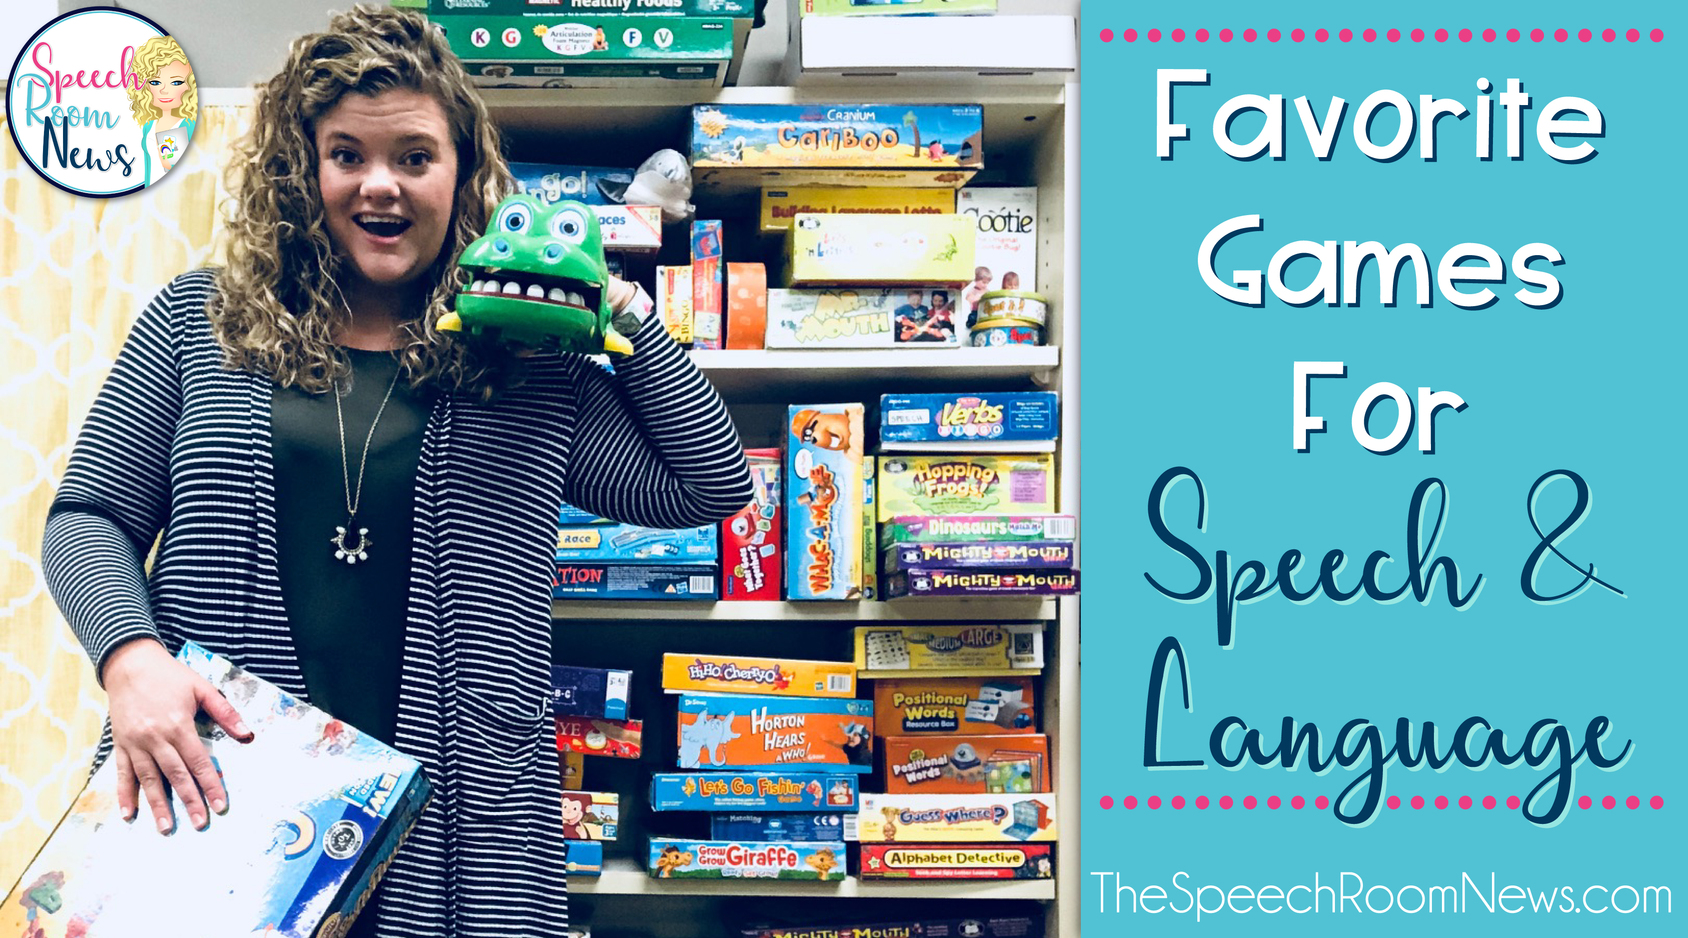 Speech Therapy Games